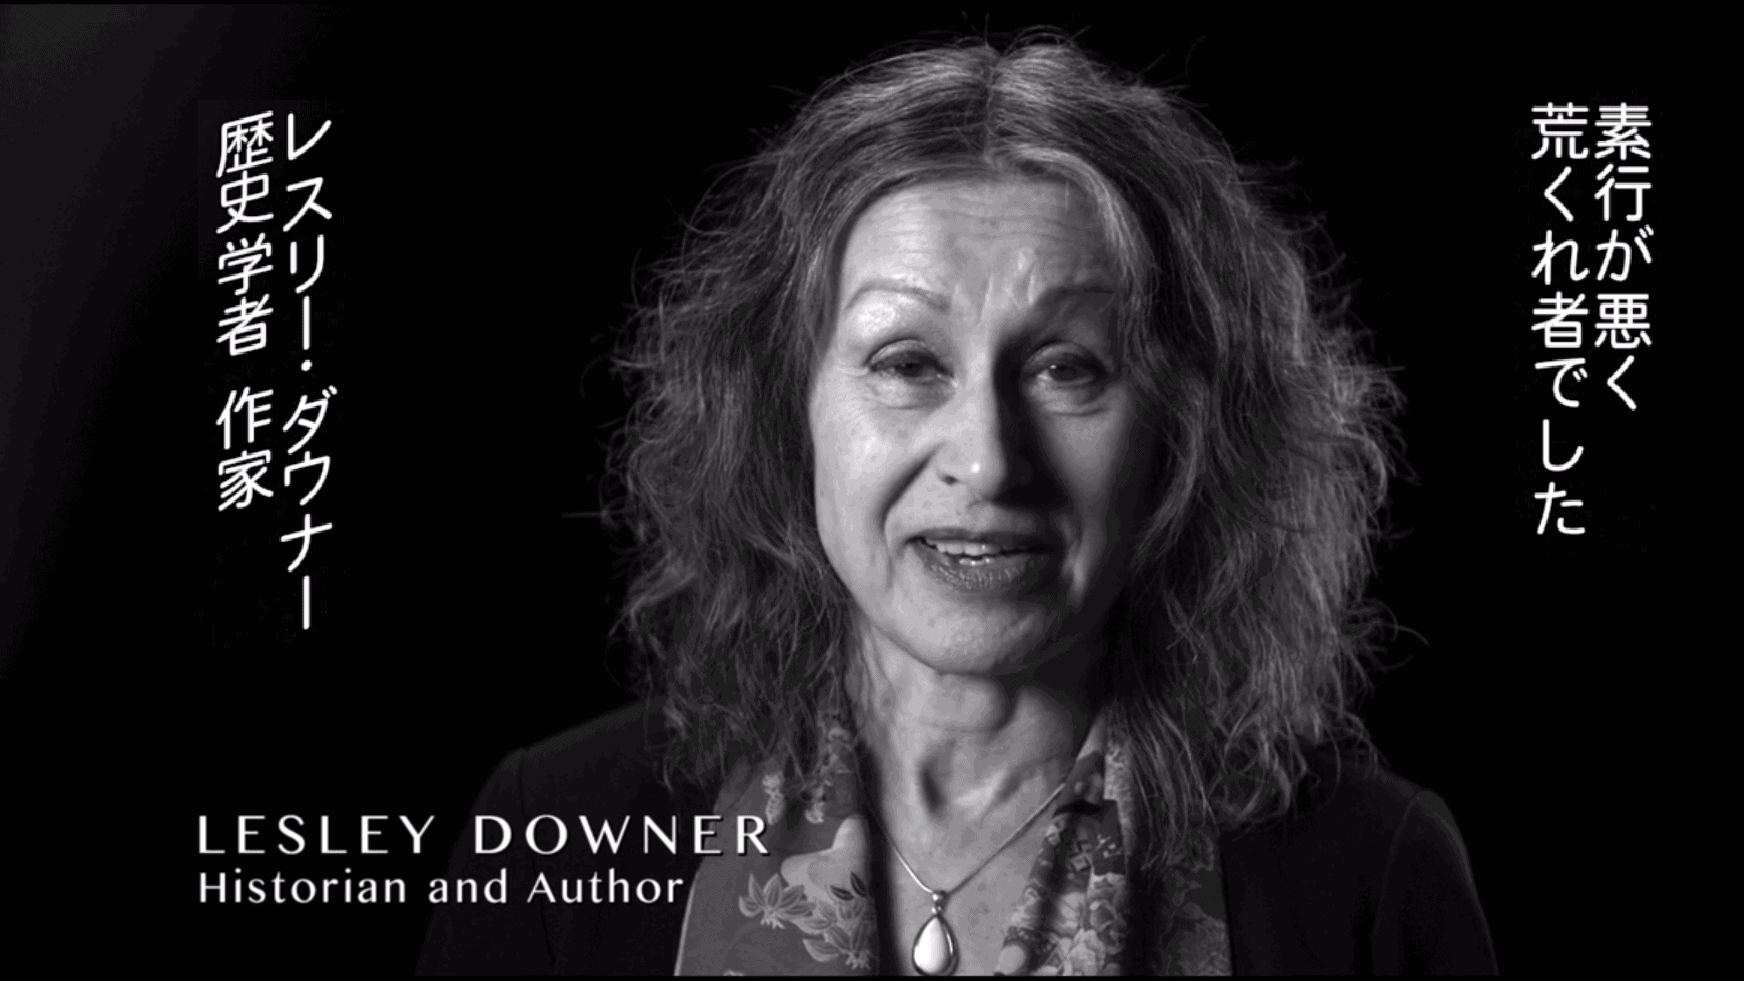 Lesley Downer in Age of Samurai on Netflix